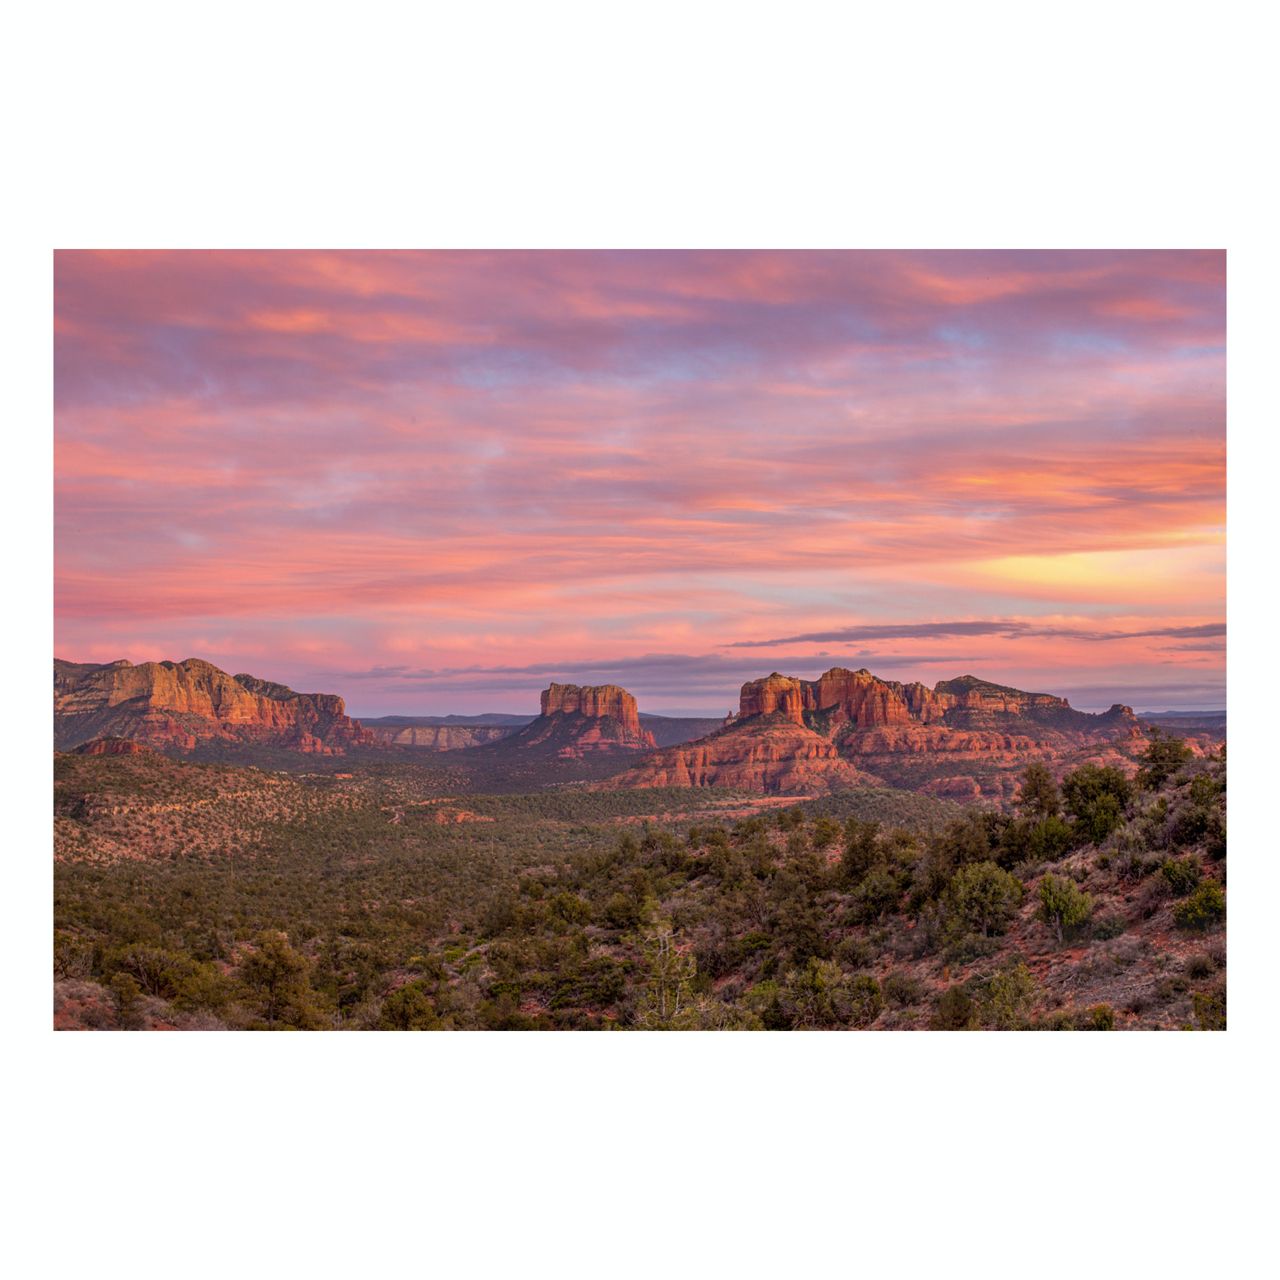 Fine Art Prints - "Bell Rock At Sunset" | Nature Photography Prints